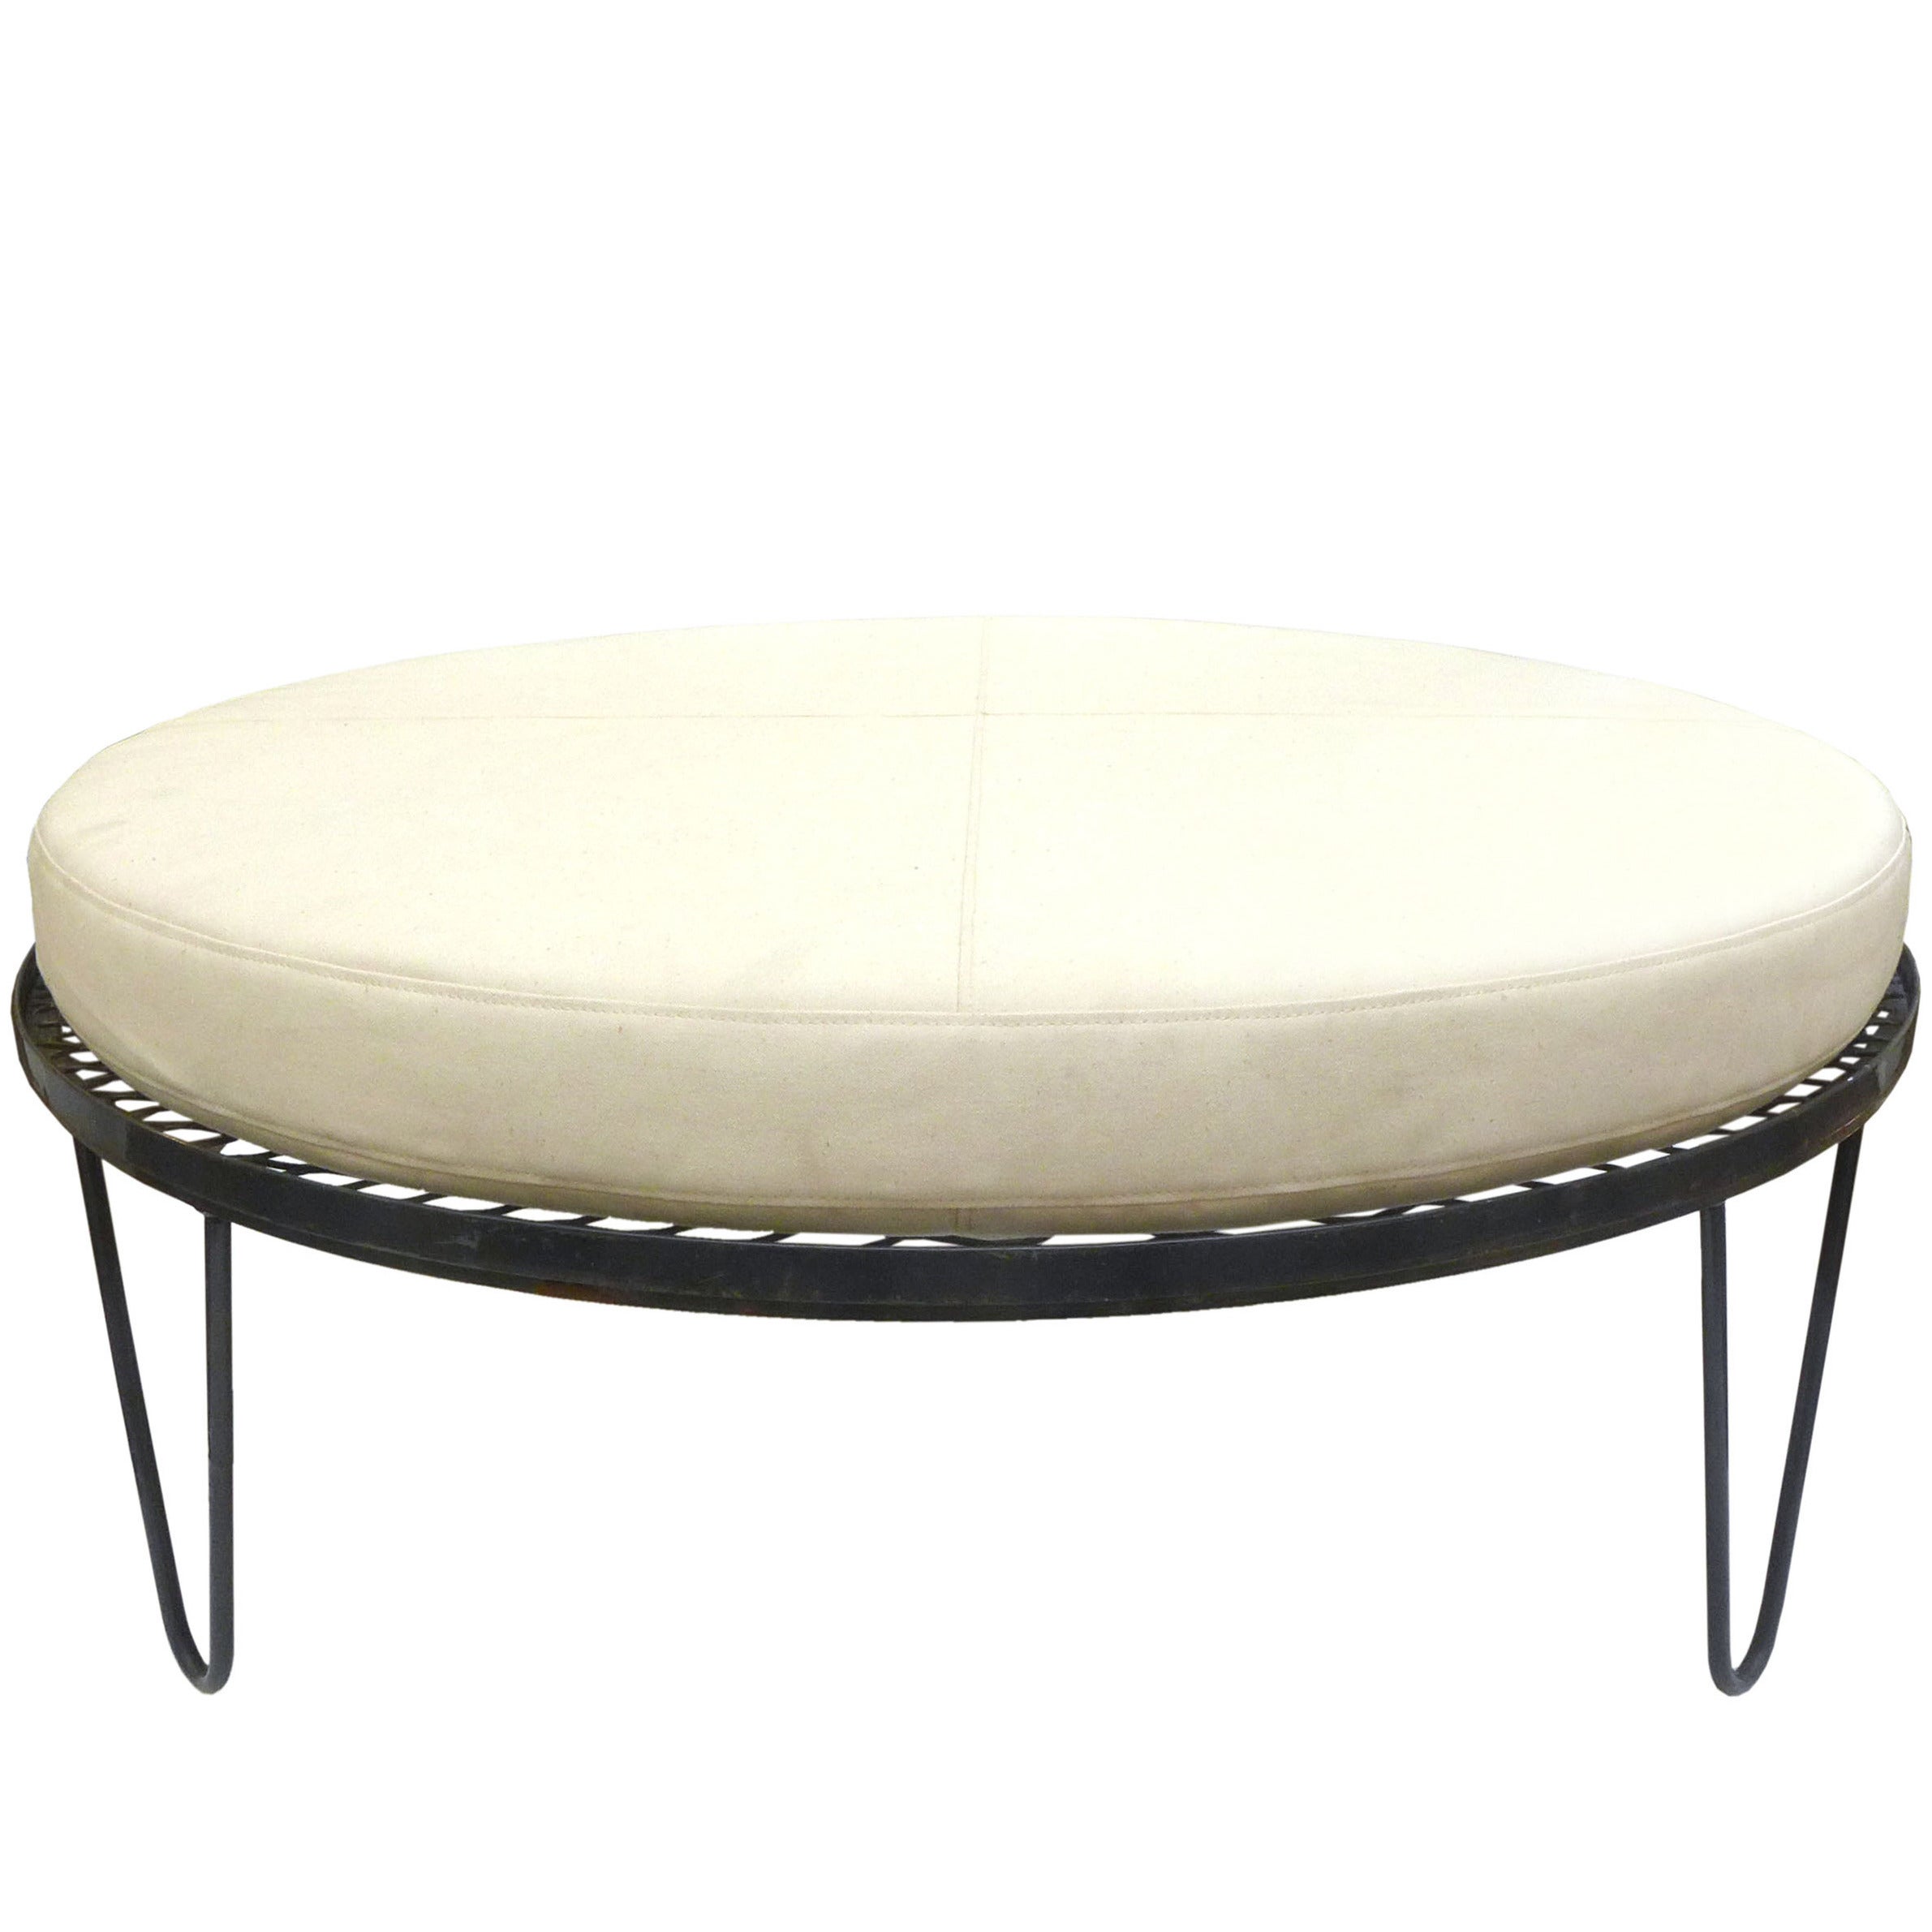 Large Wrought Iron Ottoman or Lounge